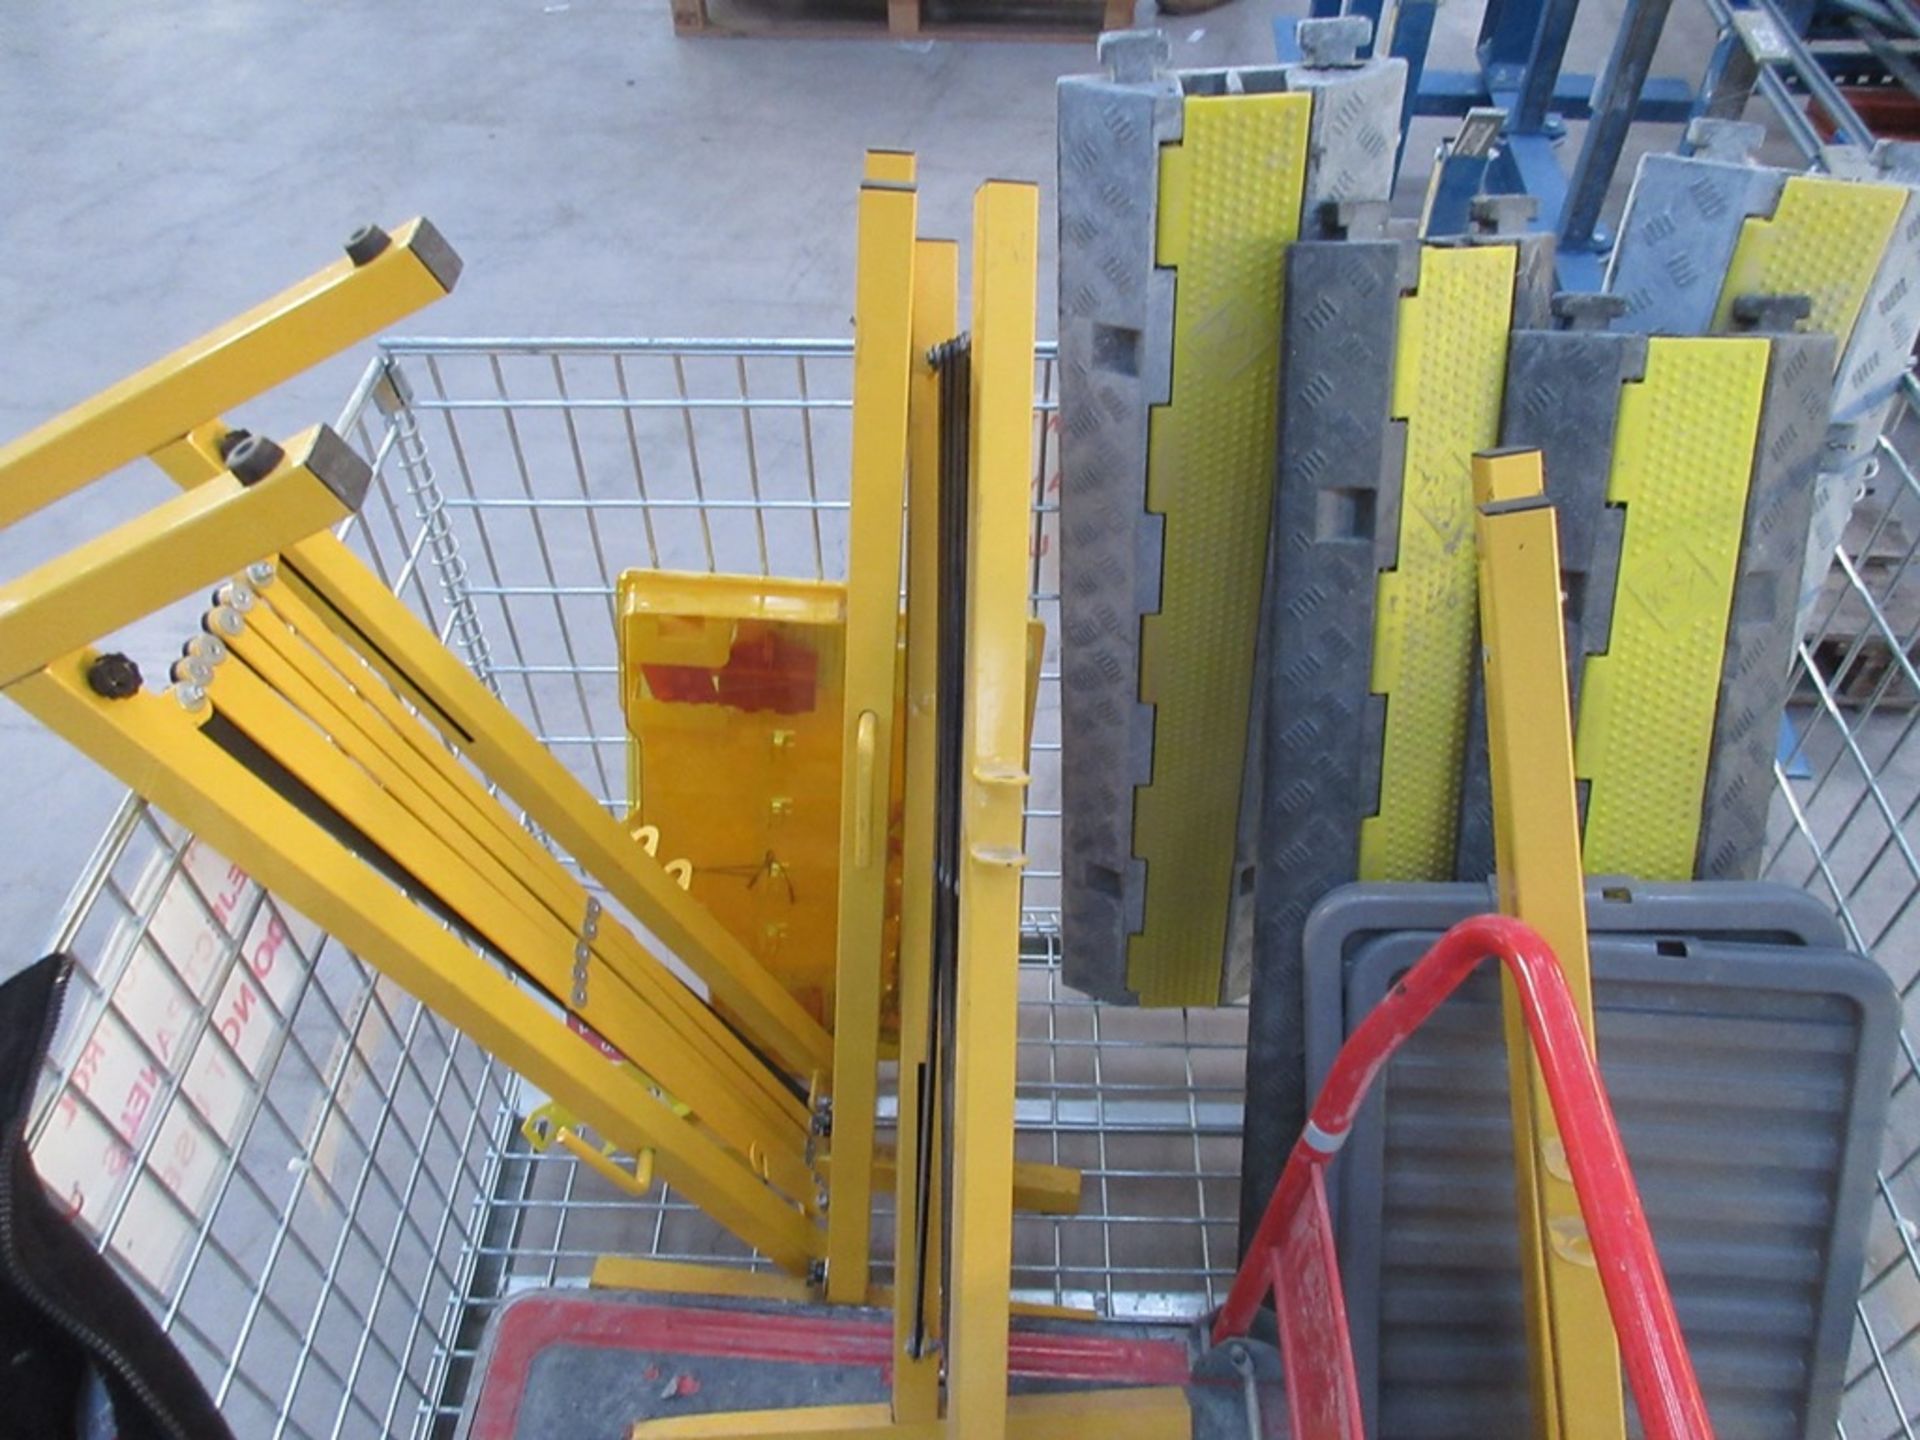 Stillage of four concertina barrier fencing, four safety walkways, mobile transport trolley